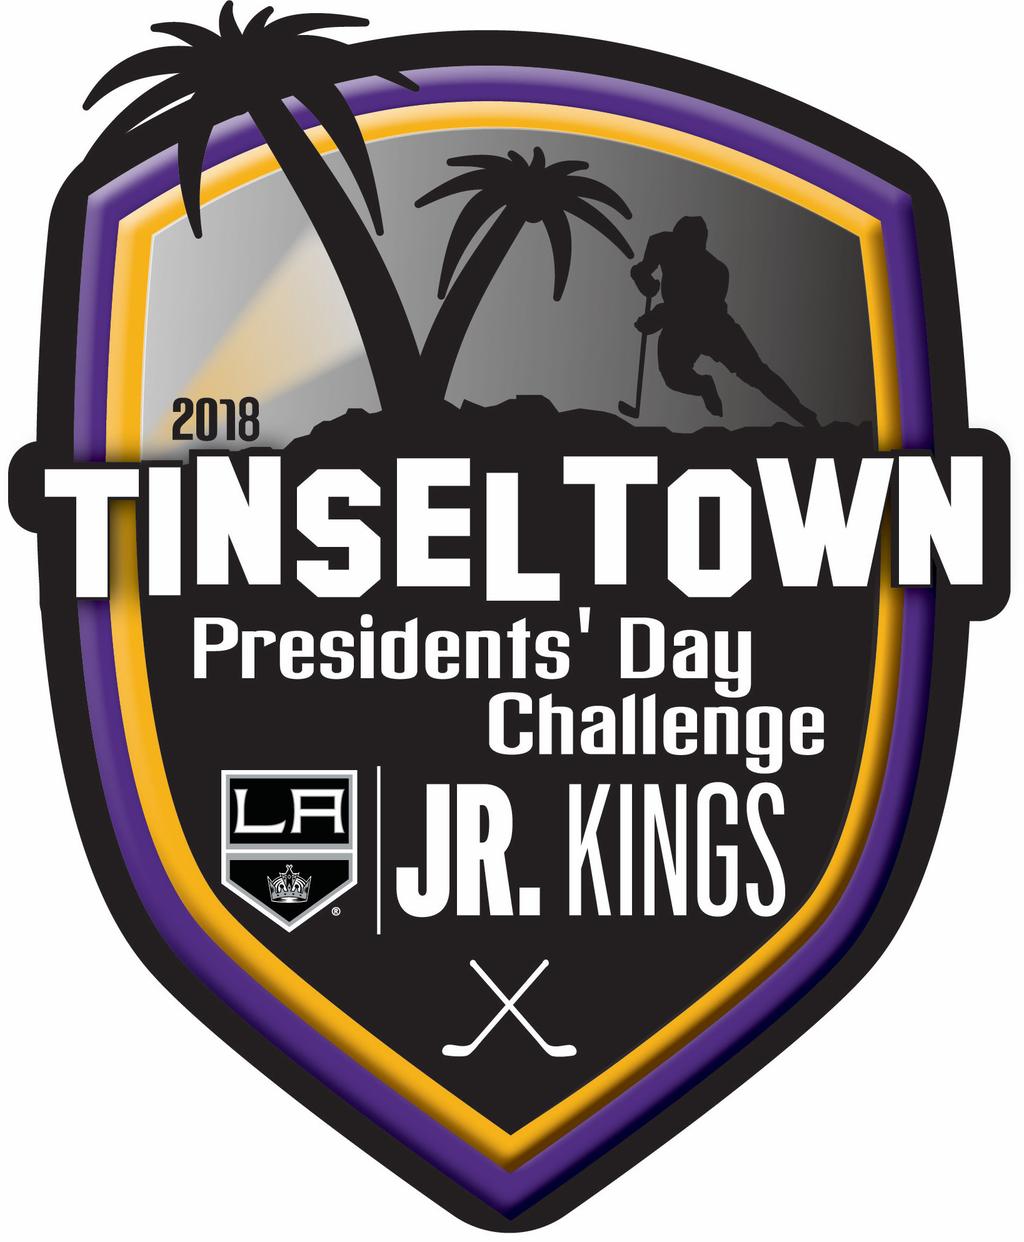 2018 LOS ANGELES JR. KINGS PRESIDENTS DAY CHALLENGE TOURNAMENT RULES REGISTRATION The registration fee is $1,695.00 for Squirt through Bantam division teams, and $900.00 for Mite B teams.